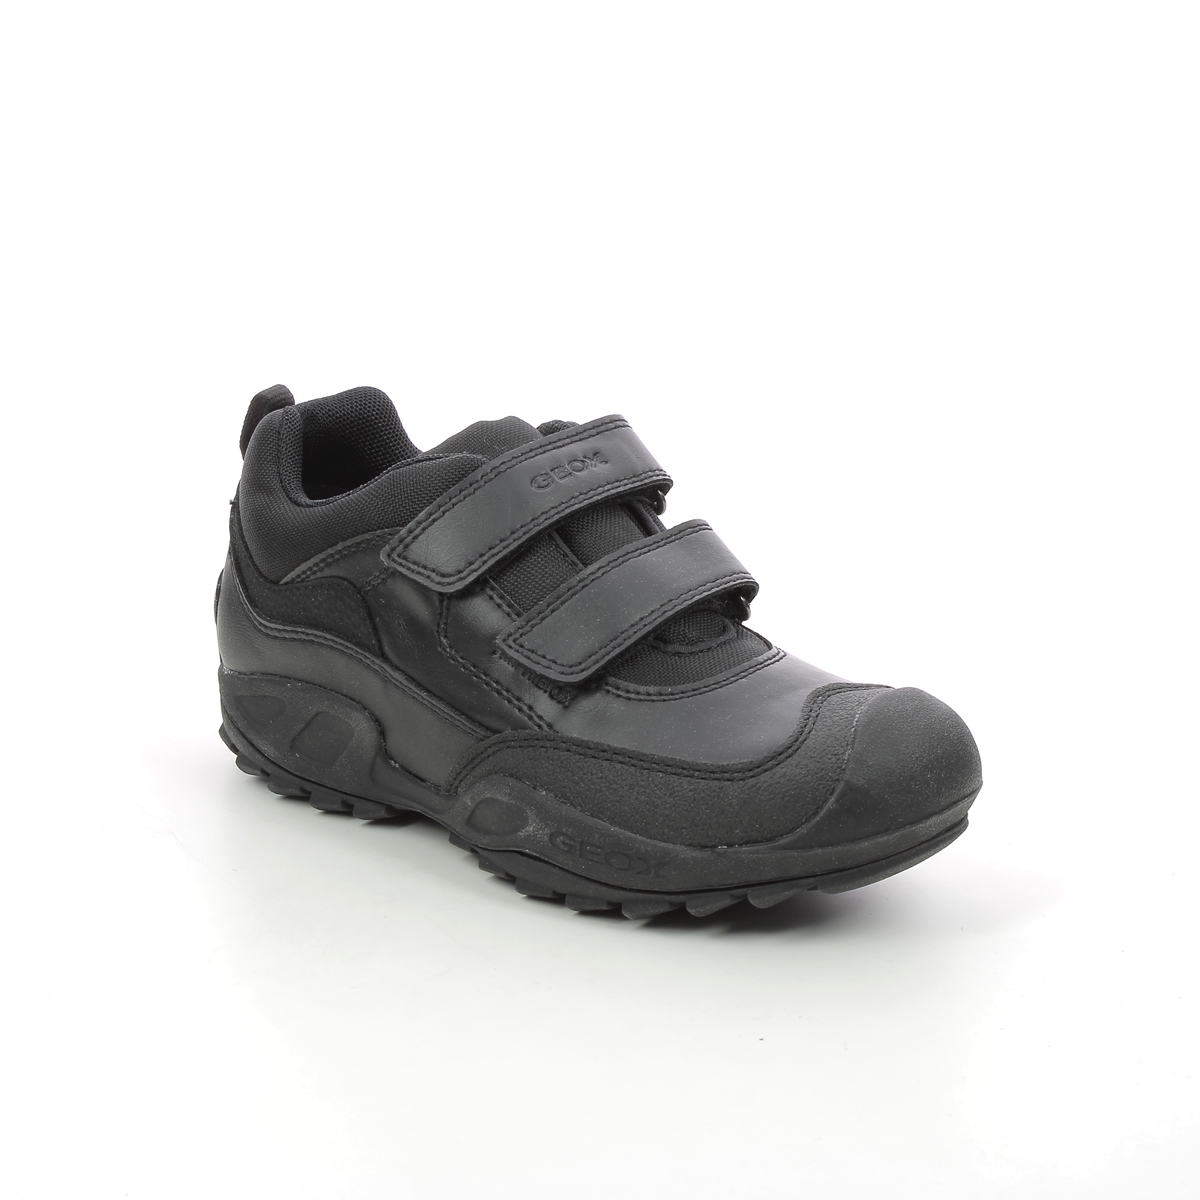 Geox - New Savage Tex (Black) J841Wb-C9999 In Size 39 In Plain Black For School For kids